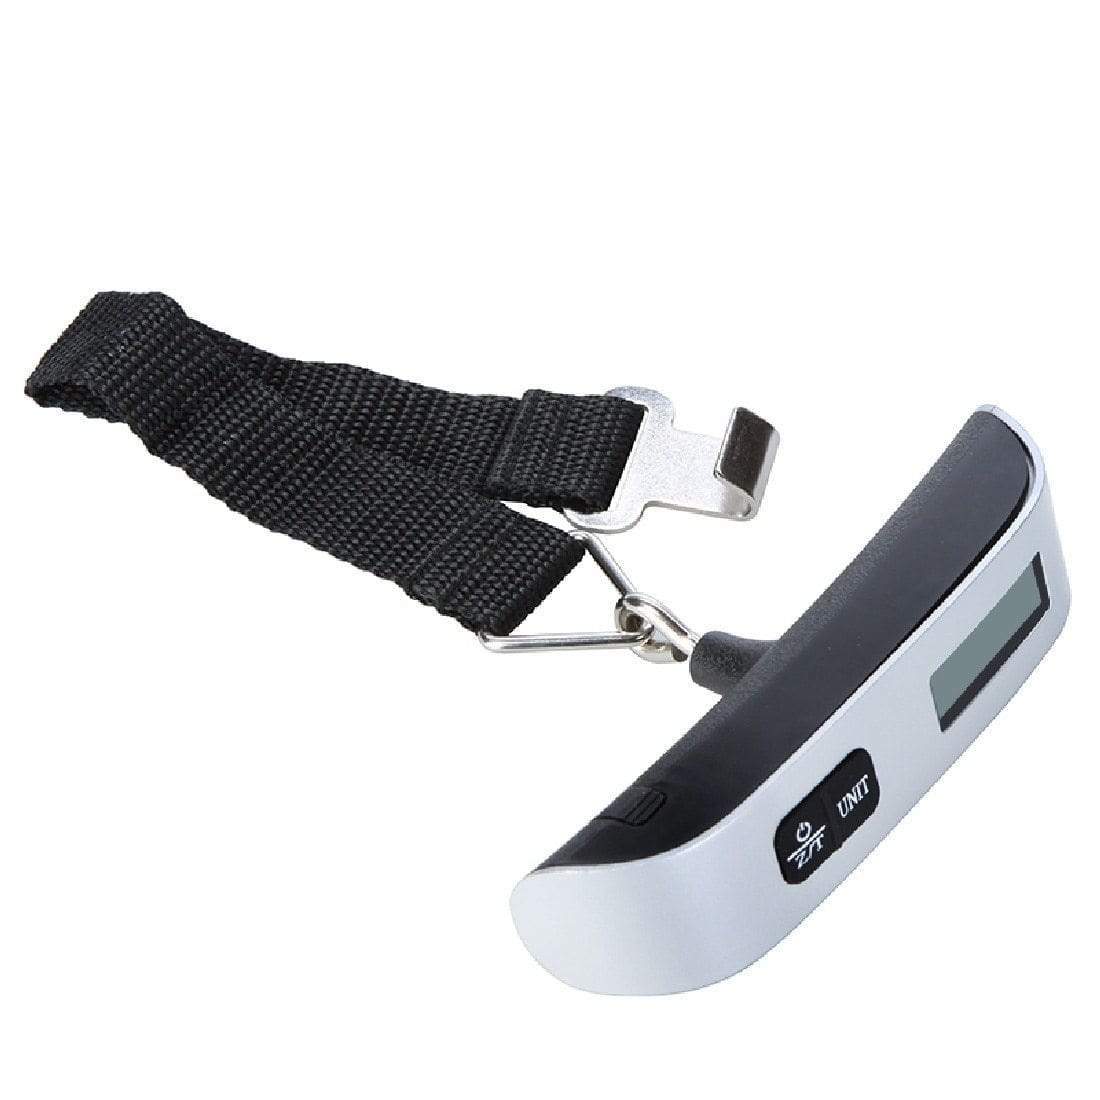 Tech Gimmicks Travel Digital Electronic Scale For Travel Suitcase Luggage